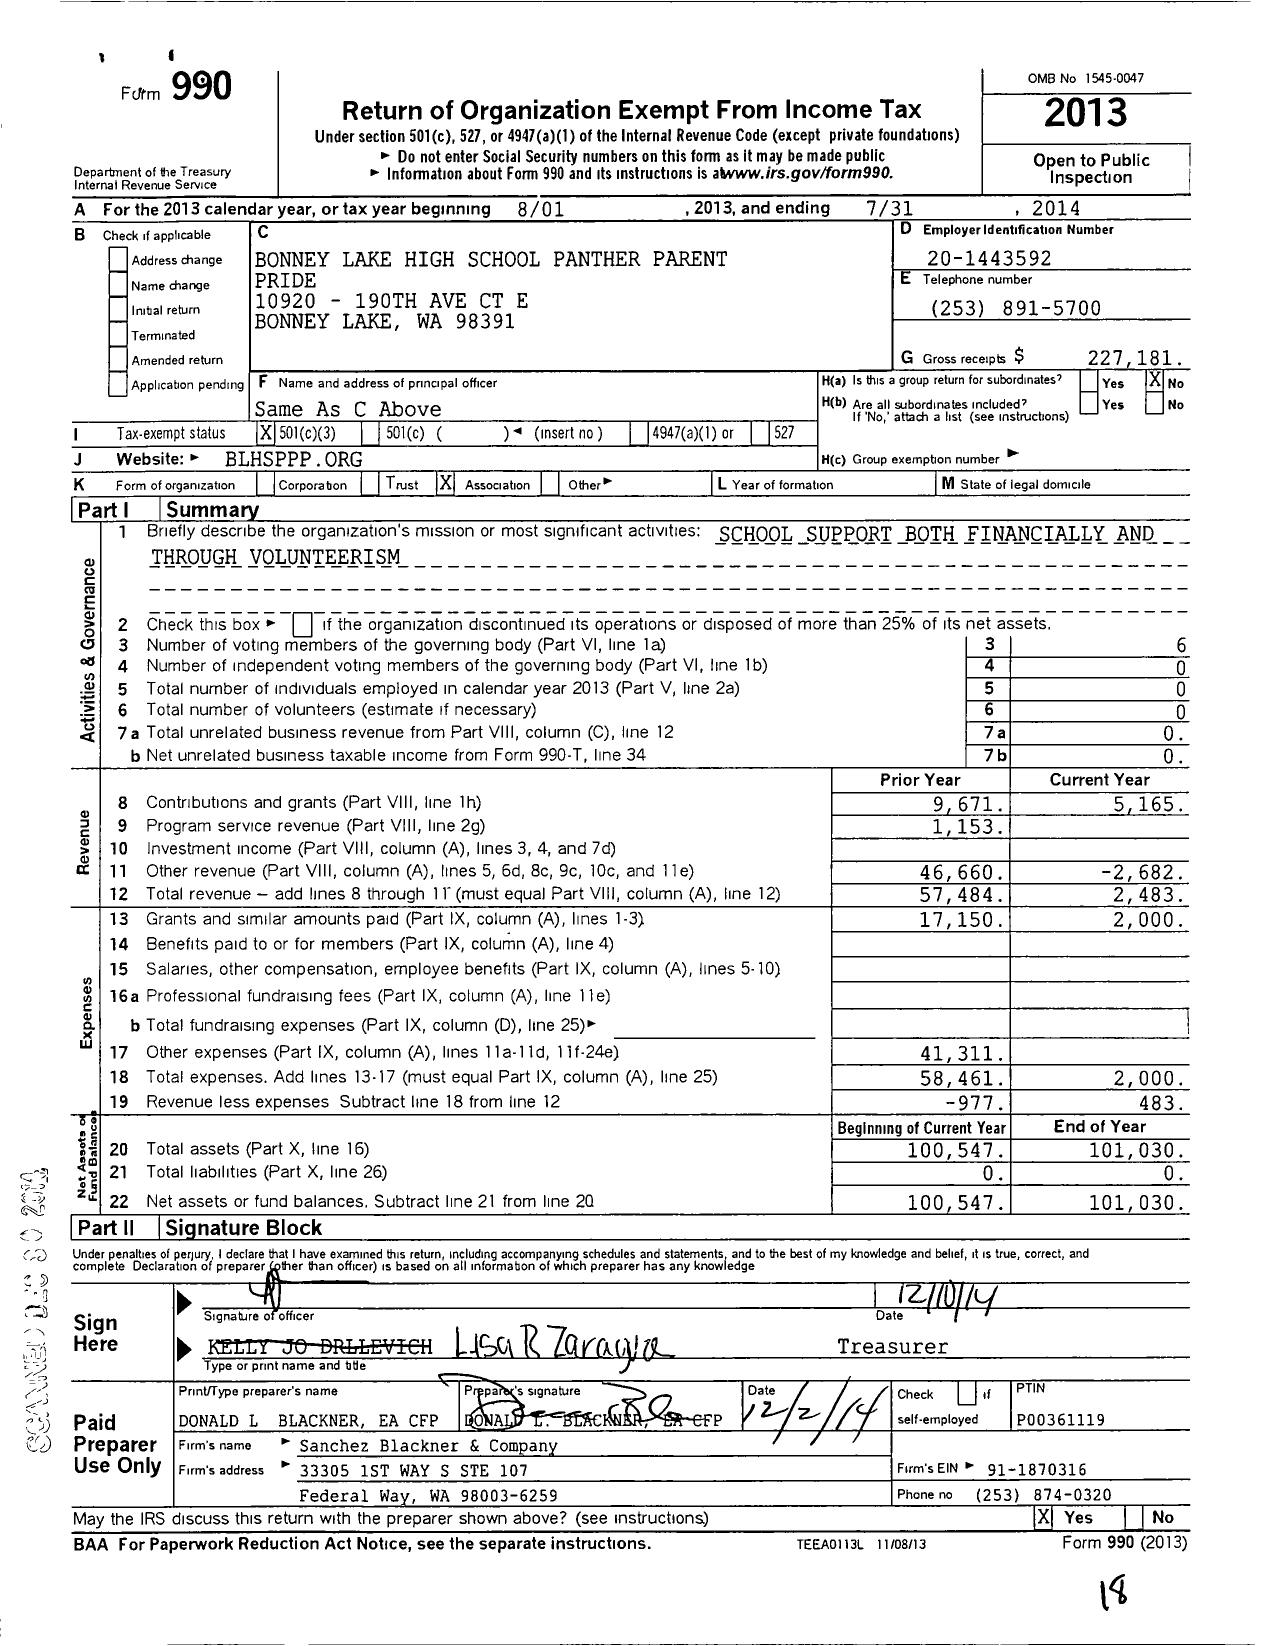 Image of first page of 2013 Form 990 for Bonney Lake High School Panther Parent Pride